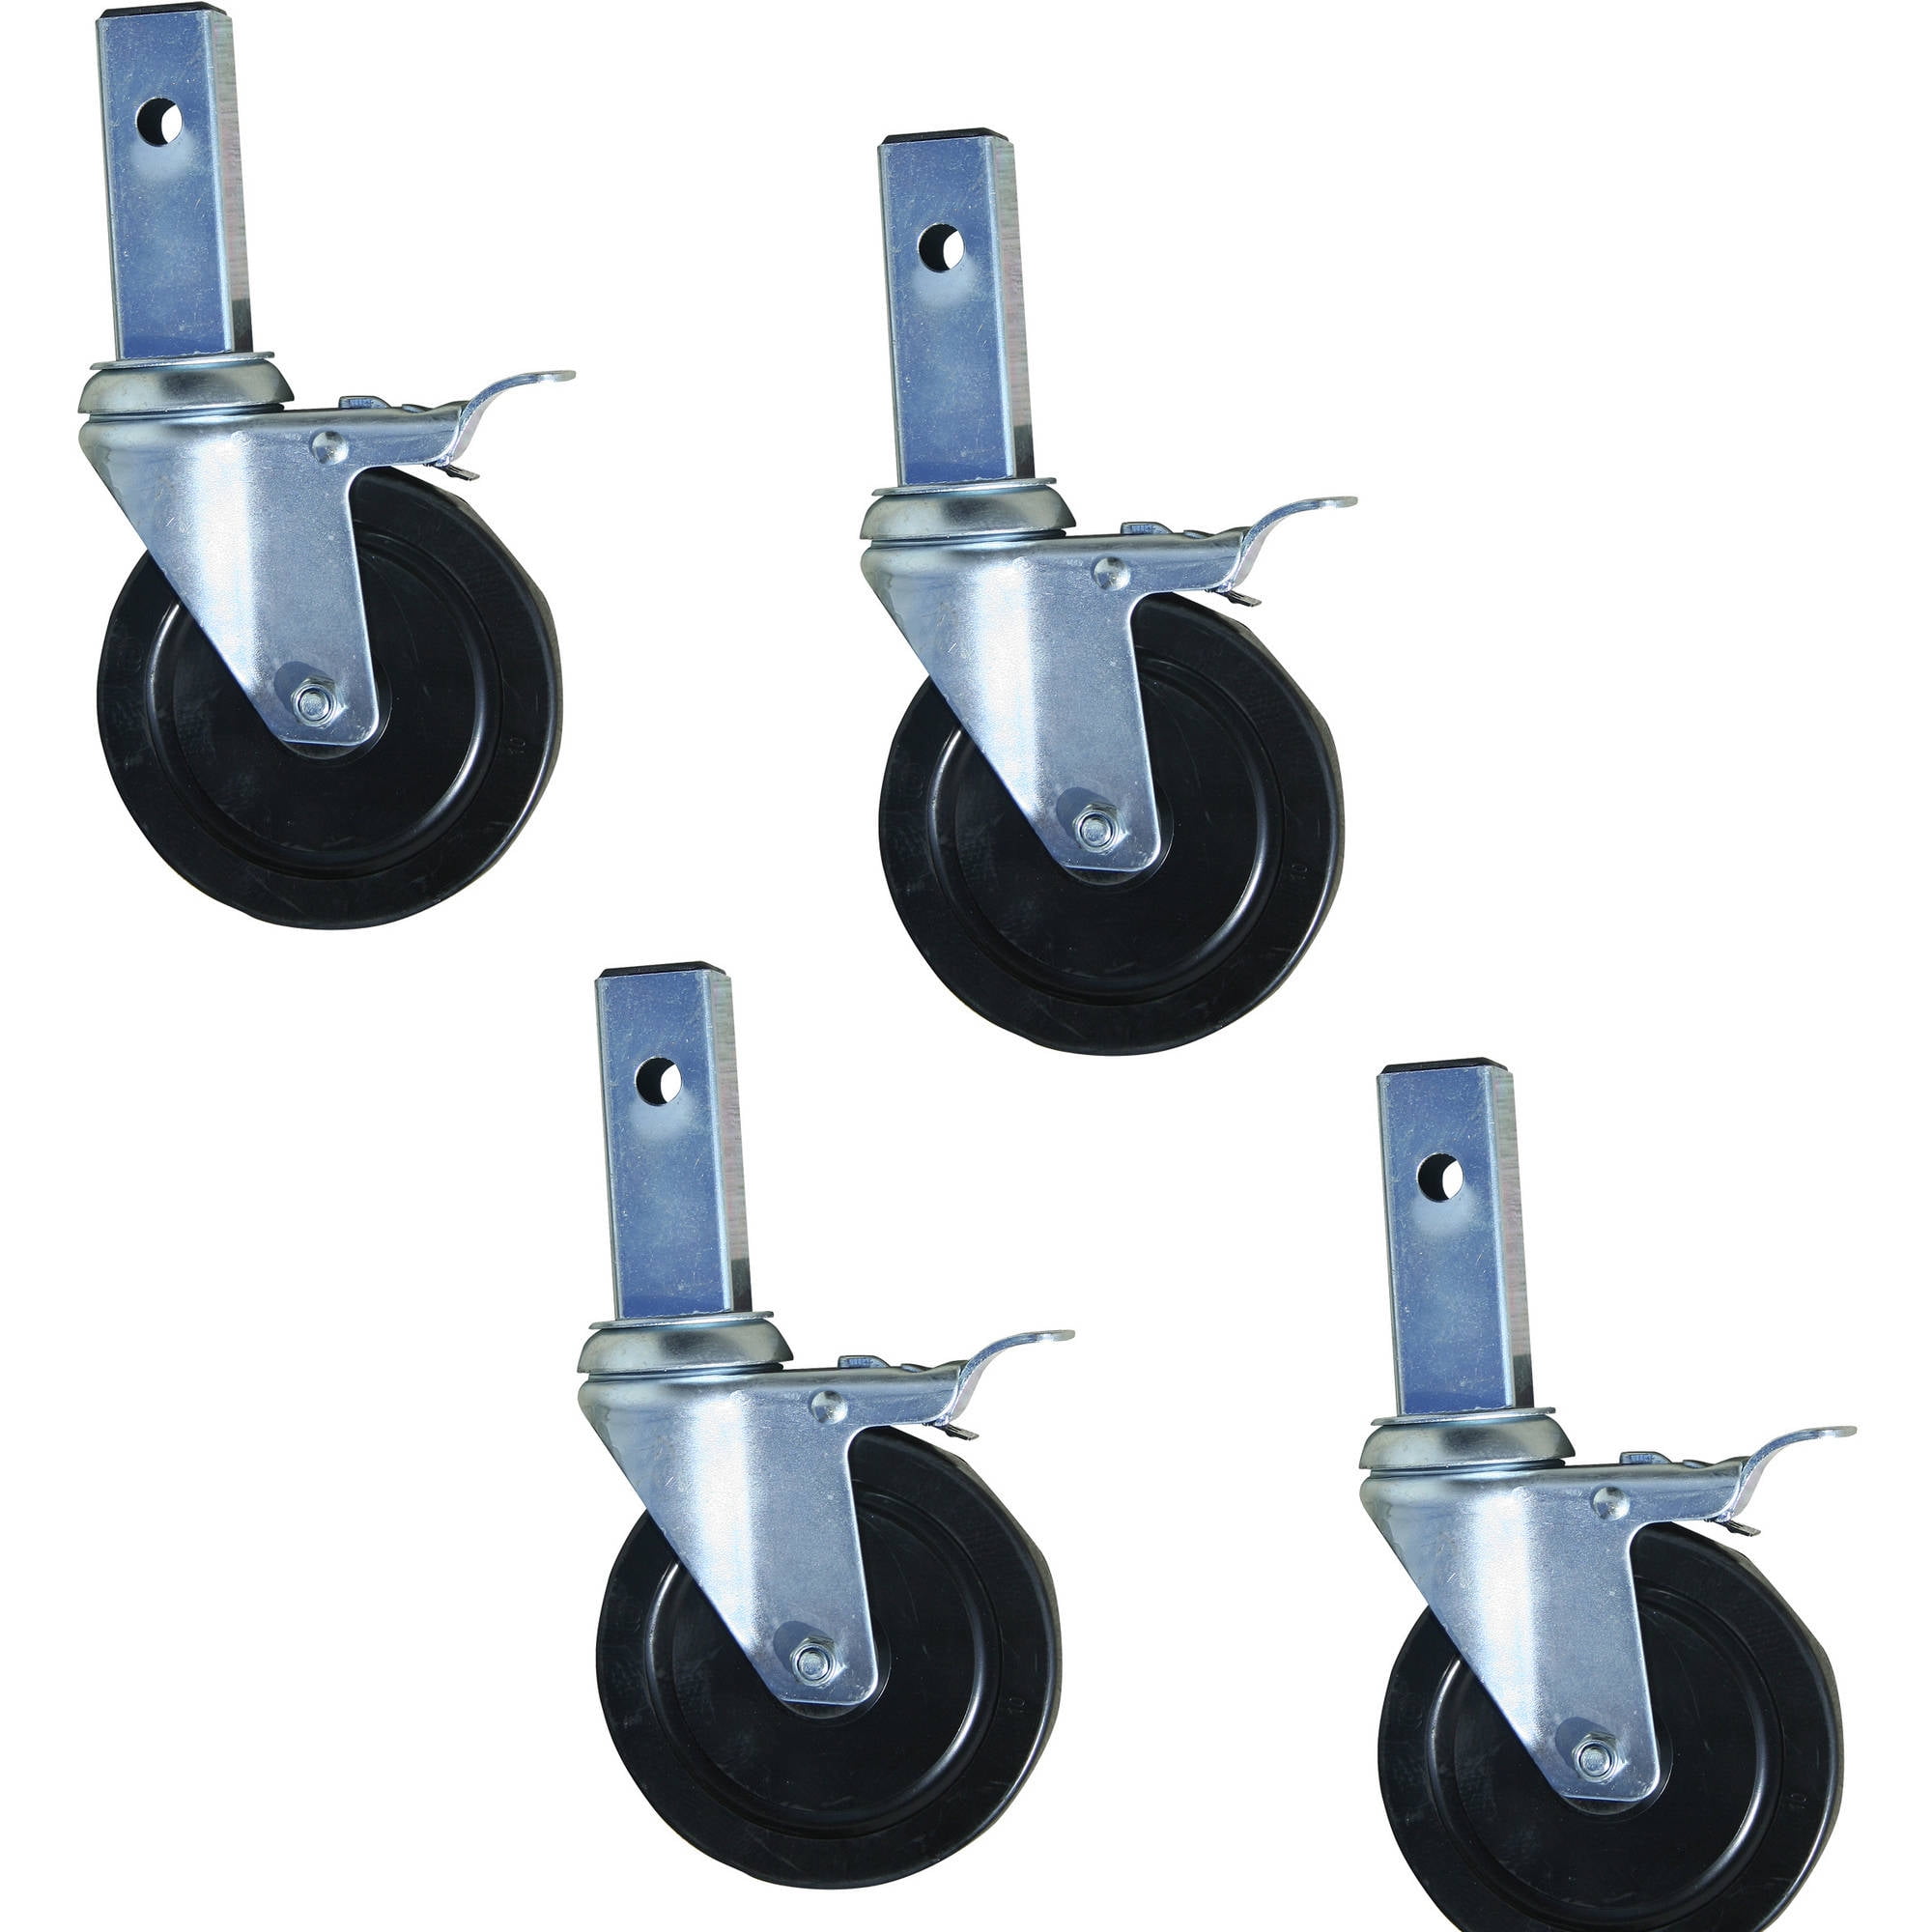 Gssi-c54p Heavy Duty 5 In. Hard Rubber Locking Caster, Set Of 4